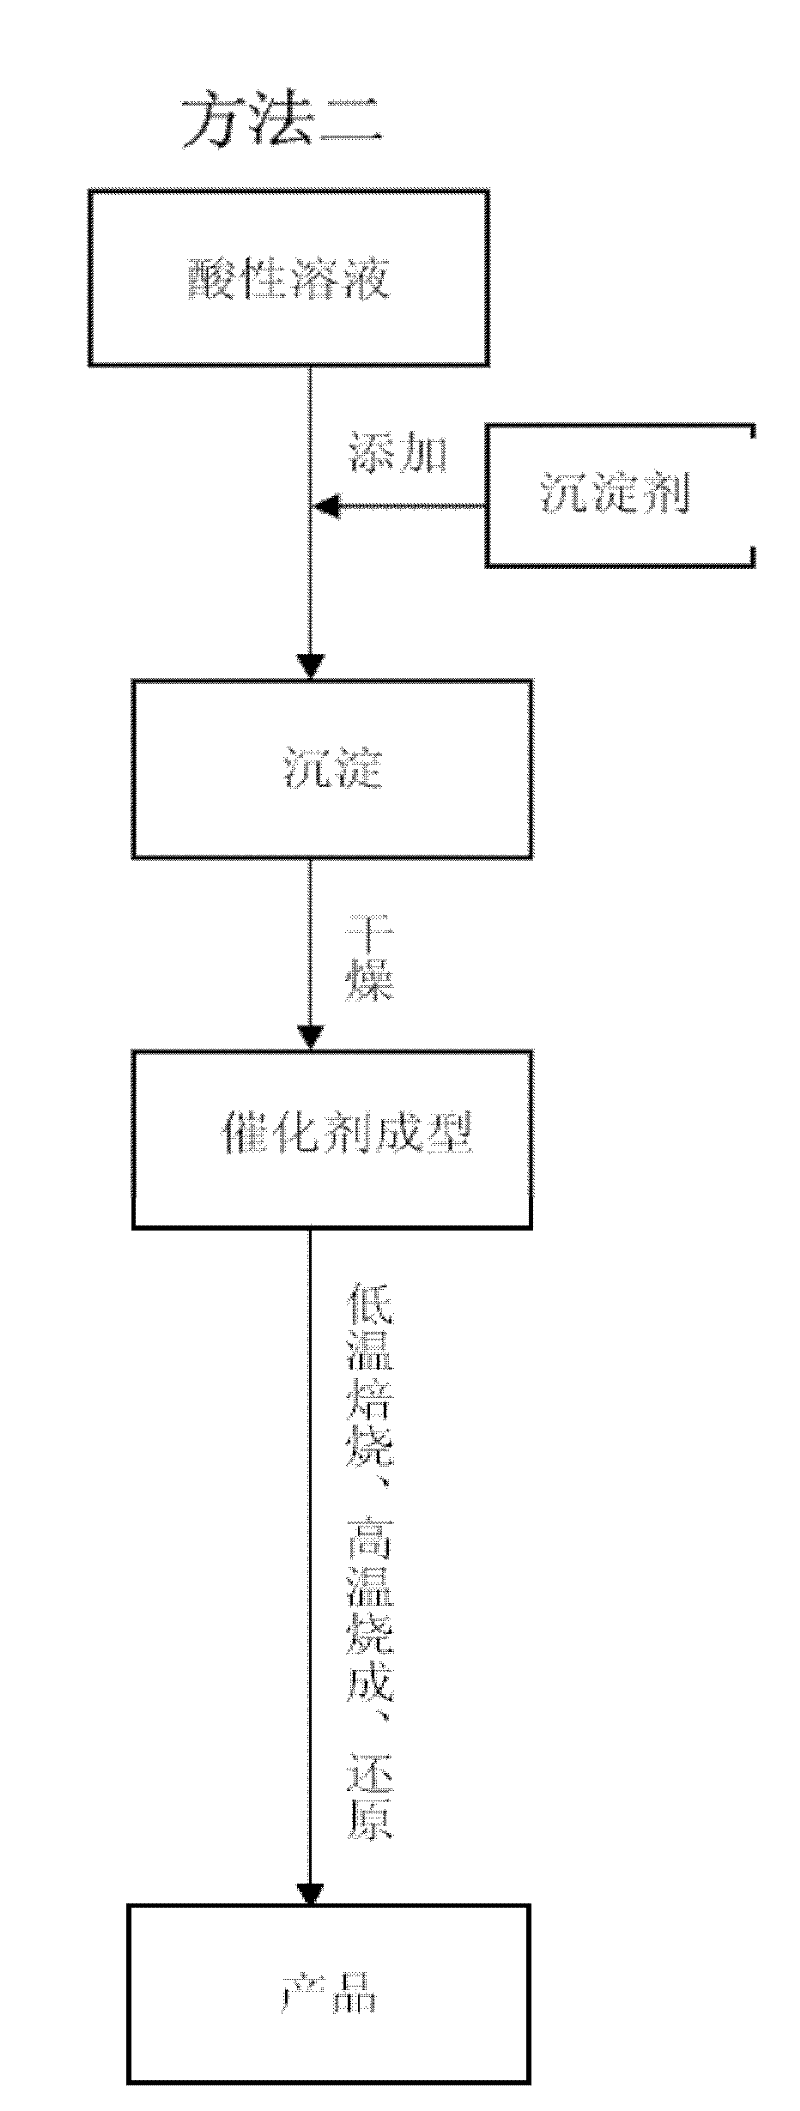 Coal gas high-temperature methanation catalyst and preparation method thereof